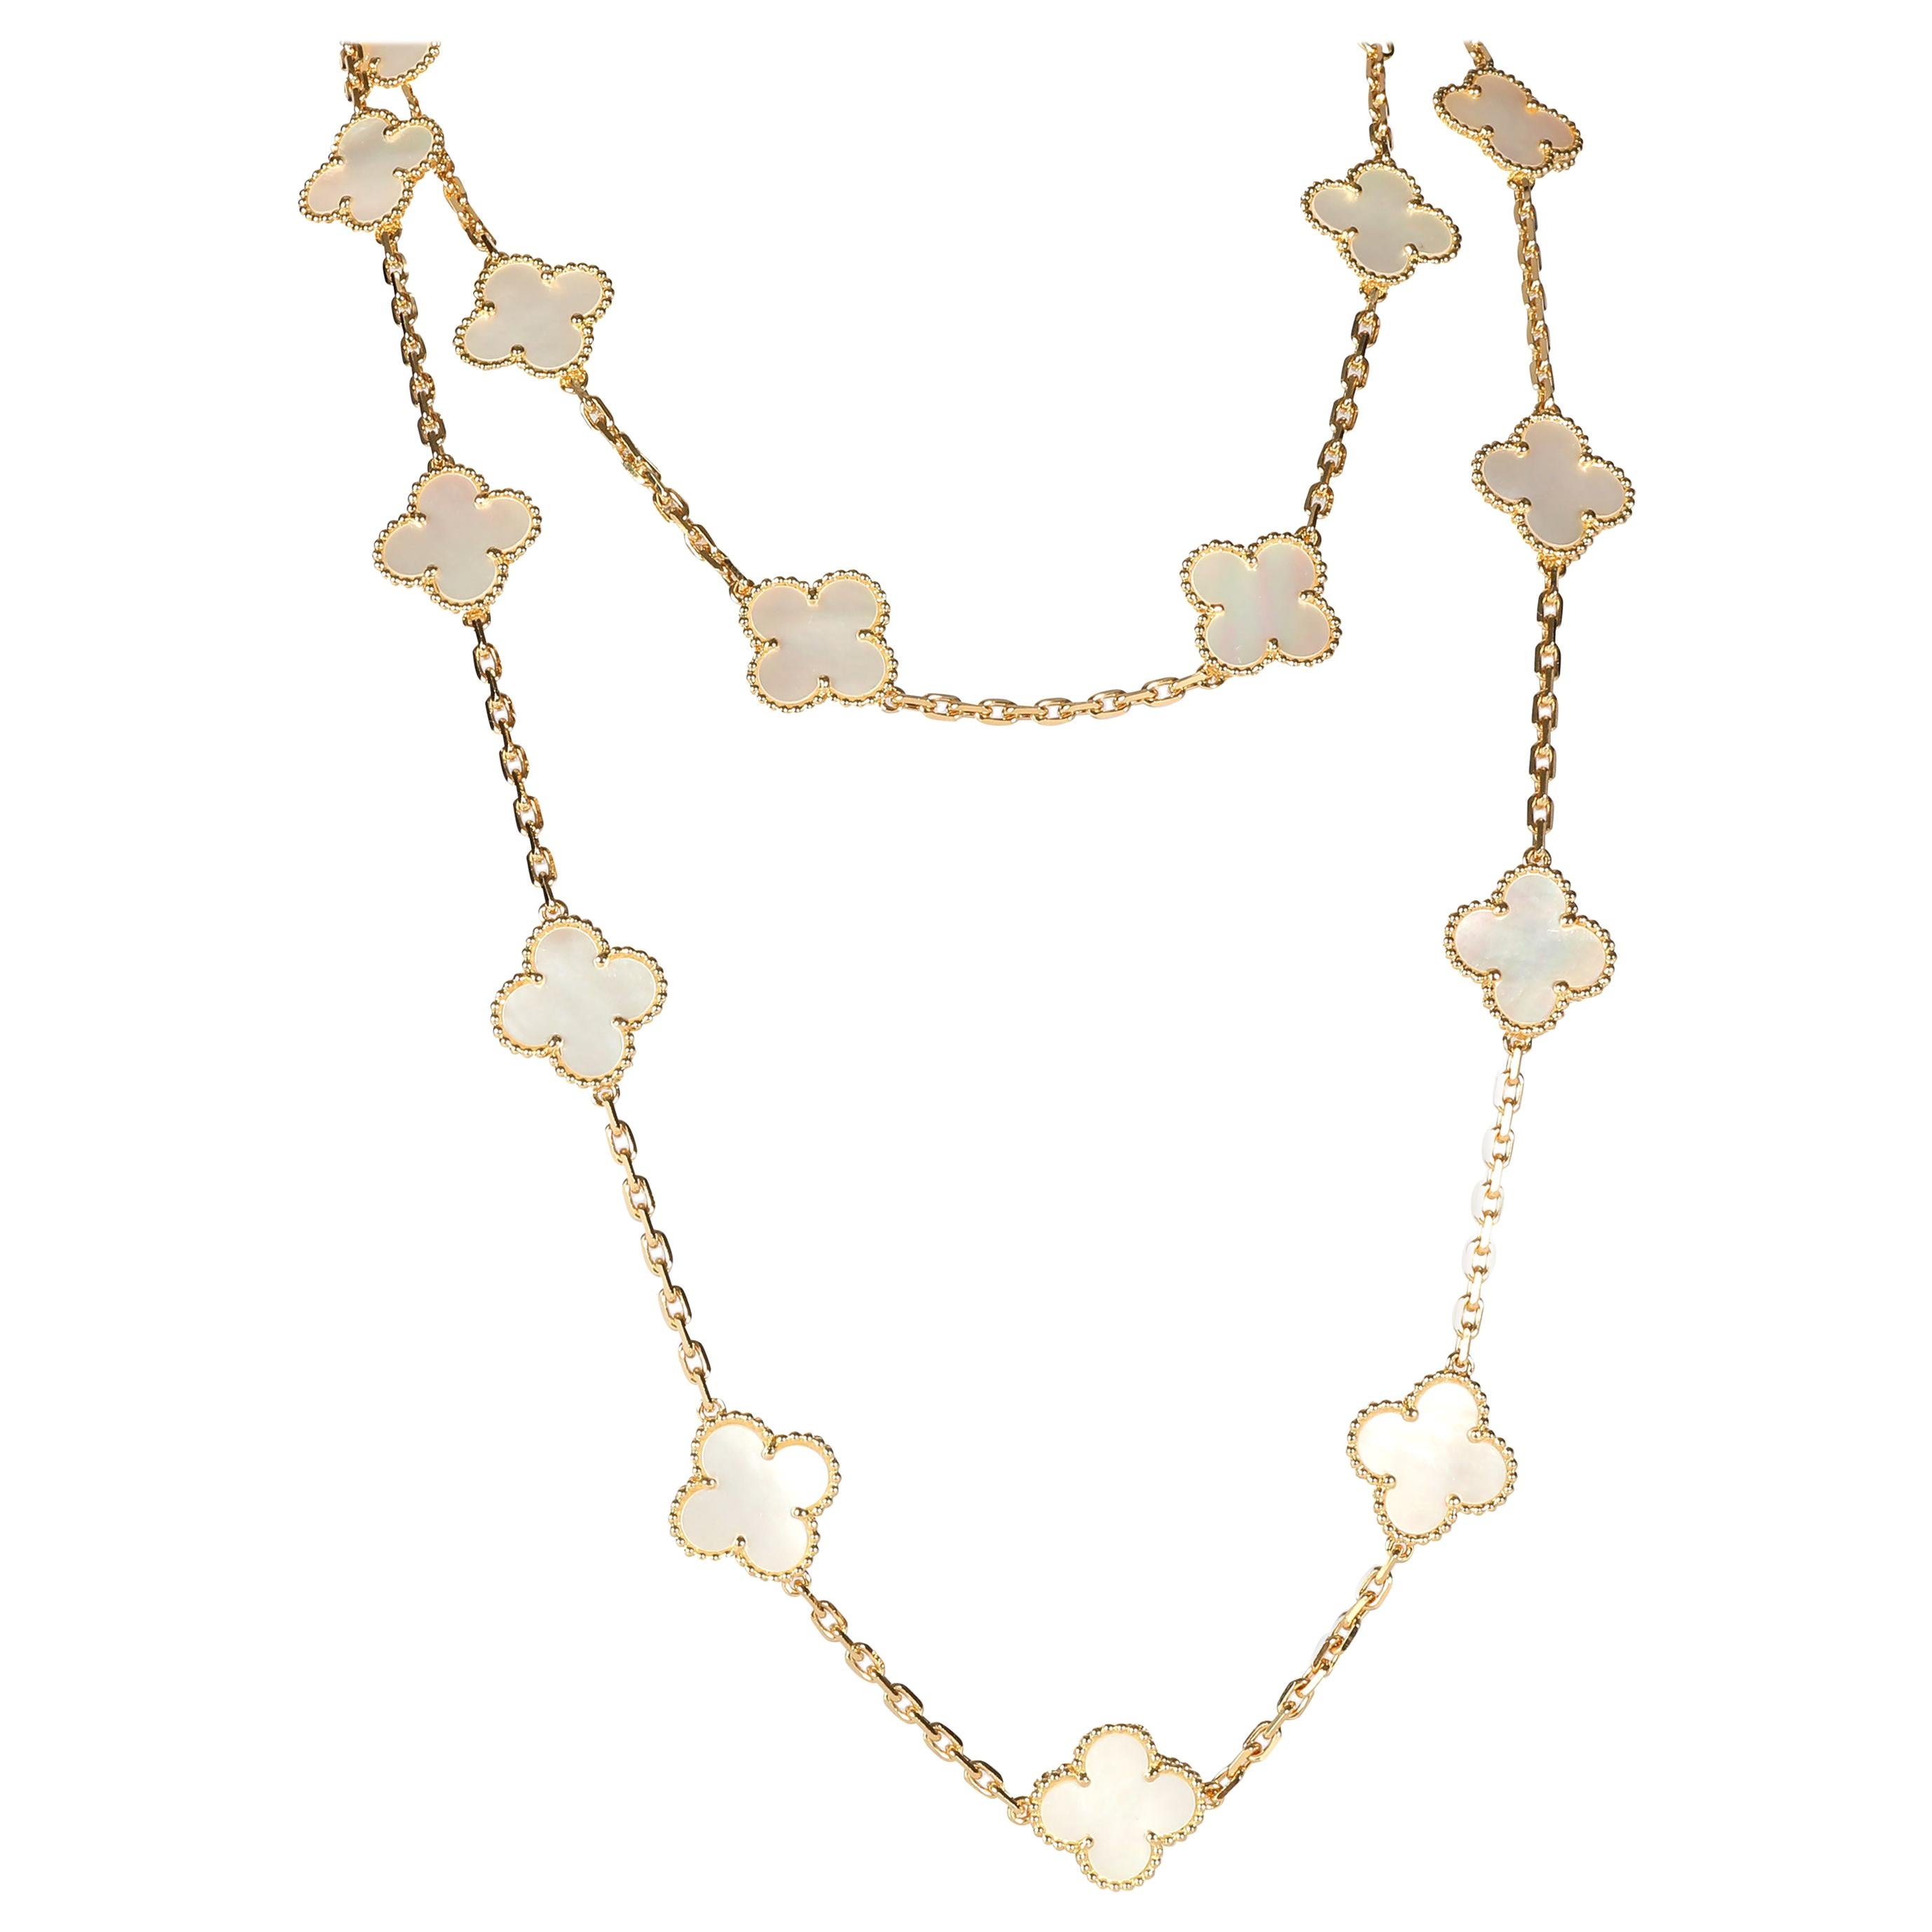 Van Cleef & Arpels Vintage Alhambra Mother of Pearl Necklace in 18K Yellow Gold